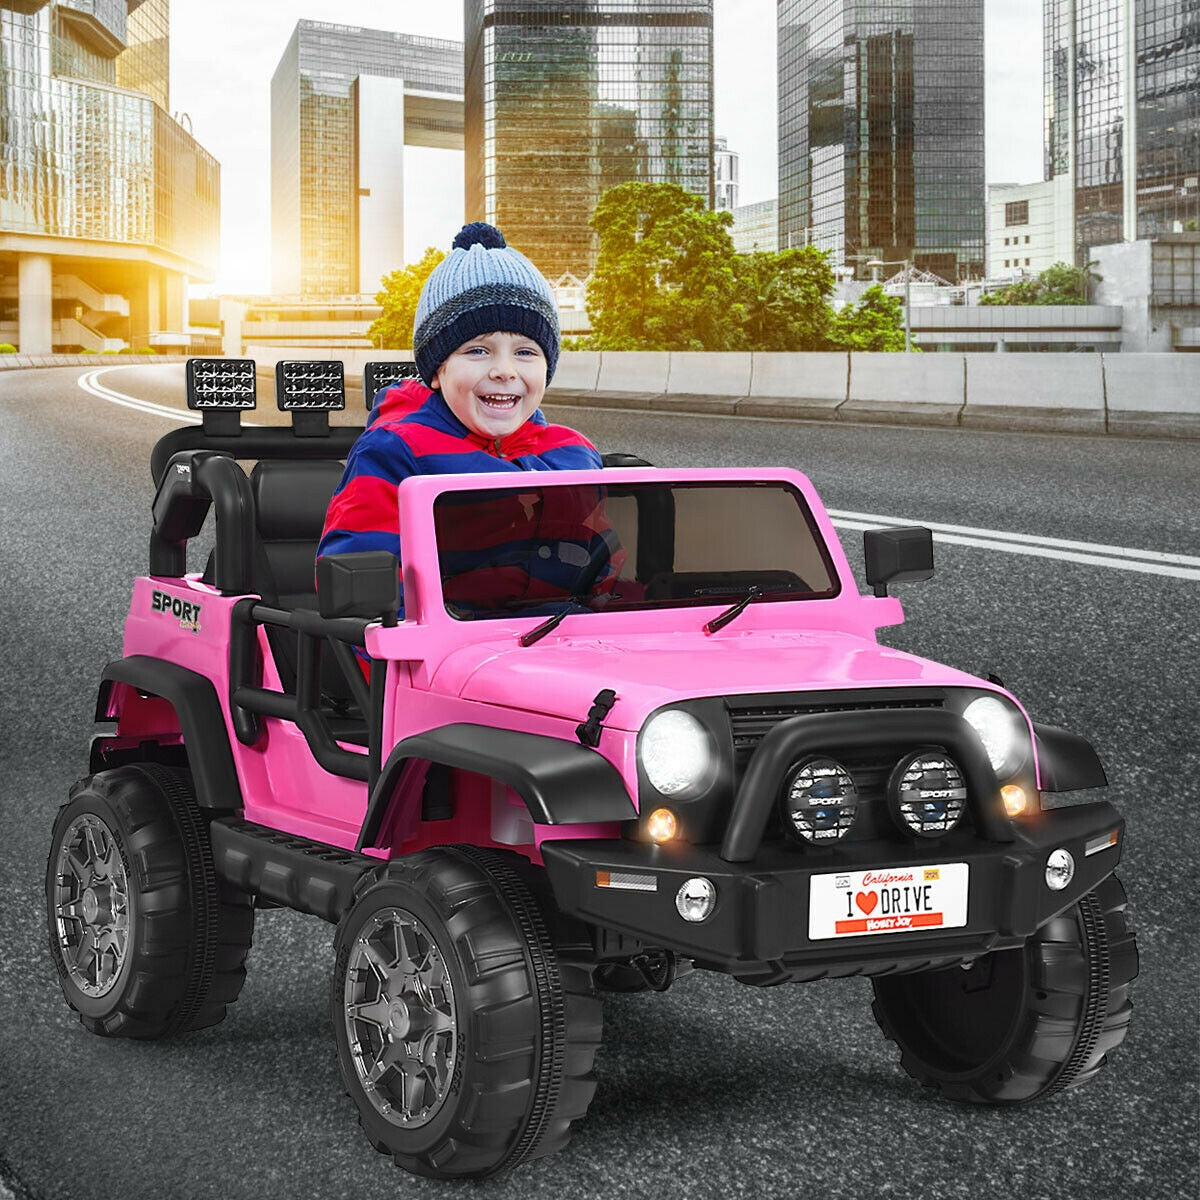 Secure and Smooth Ride: Experience the thrill of our 12V ride-on truck designed for ultimate safety and adventure. Equipped with front and rear spring suspension and a gradual start function, this toy ensures secure playtime on a variety of terrains. Always prioritize safety by fastening your child's seat belt, while the roomy seat guarantees a comfortable and joyful ride.